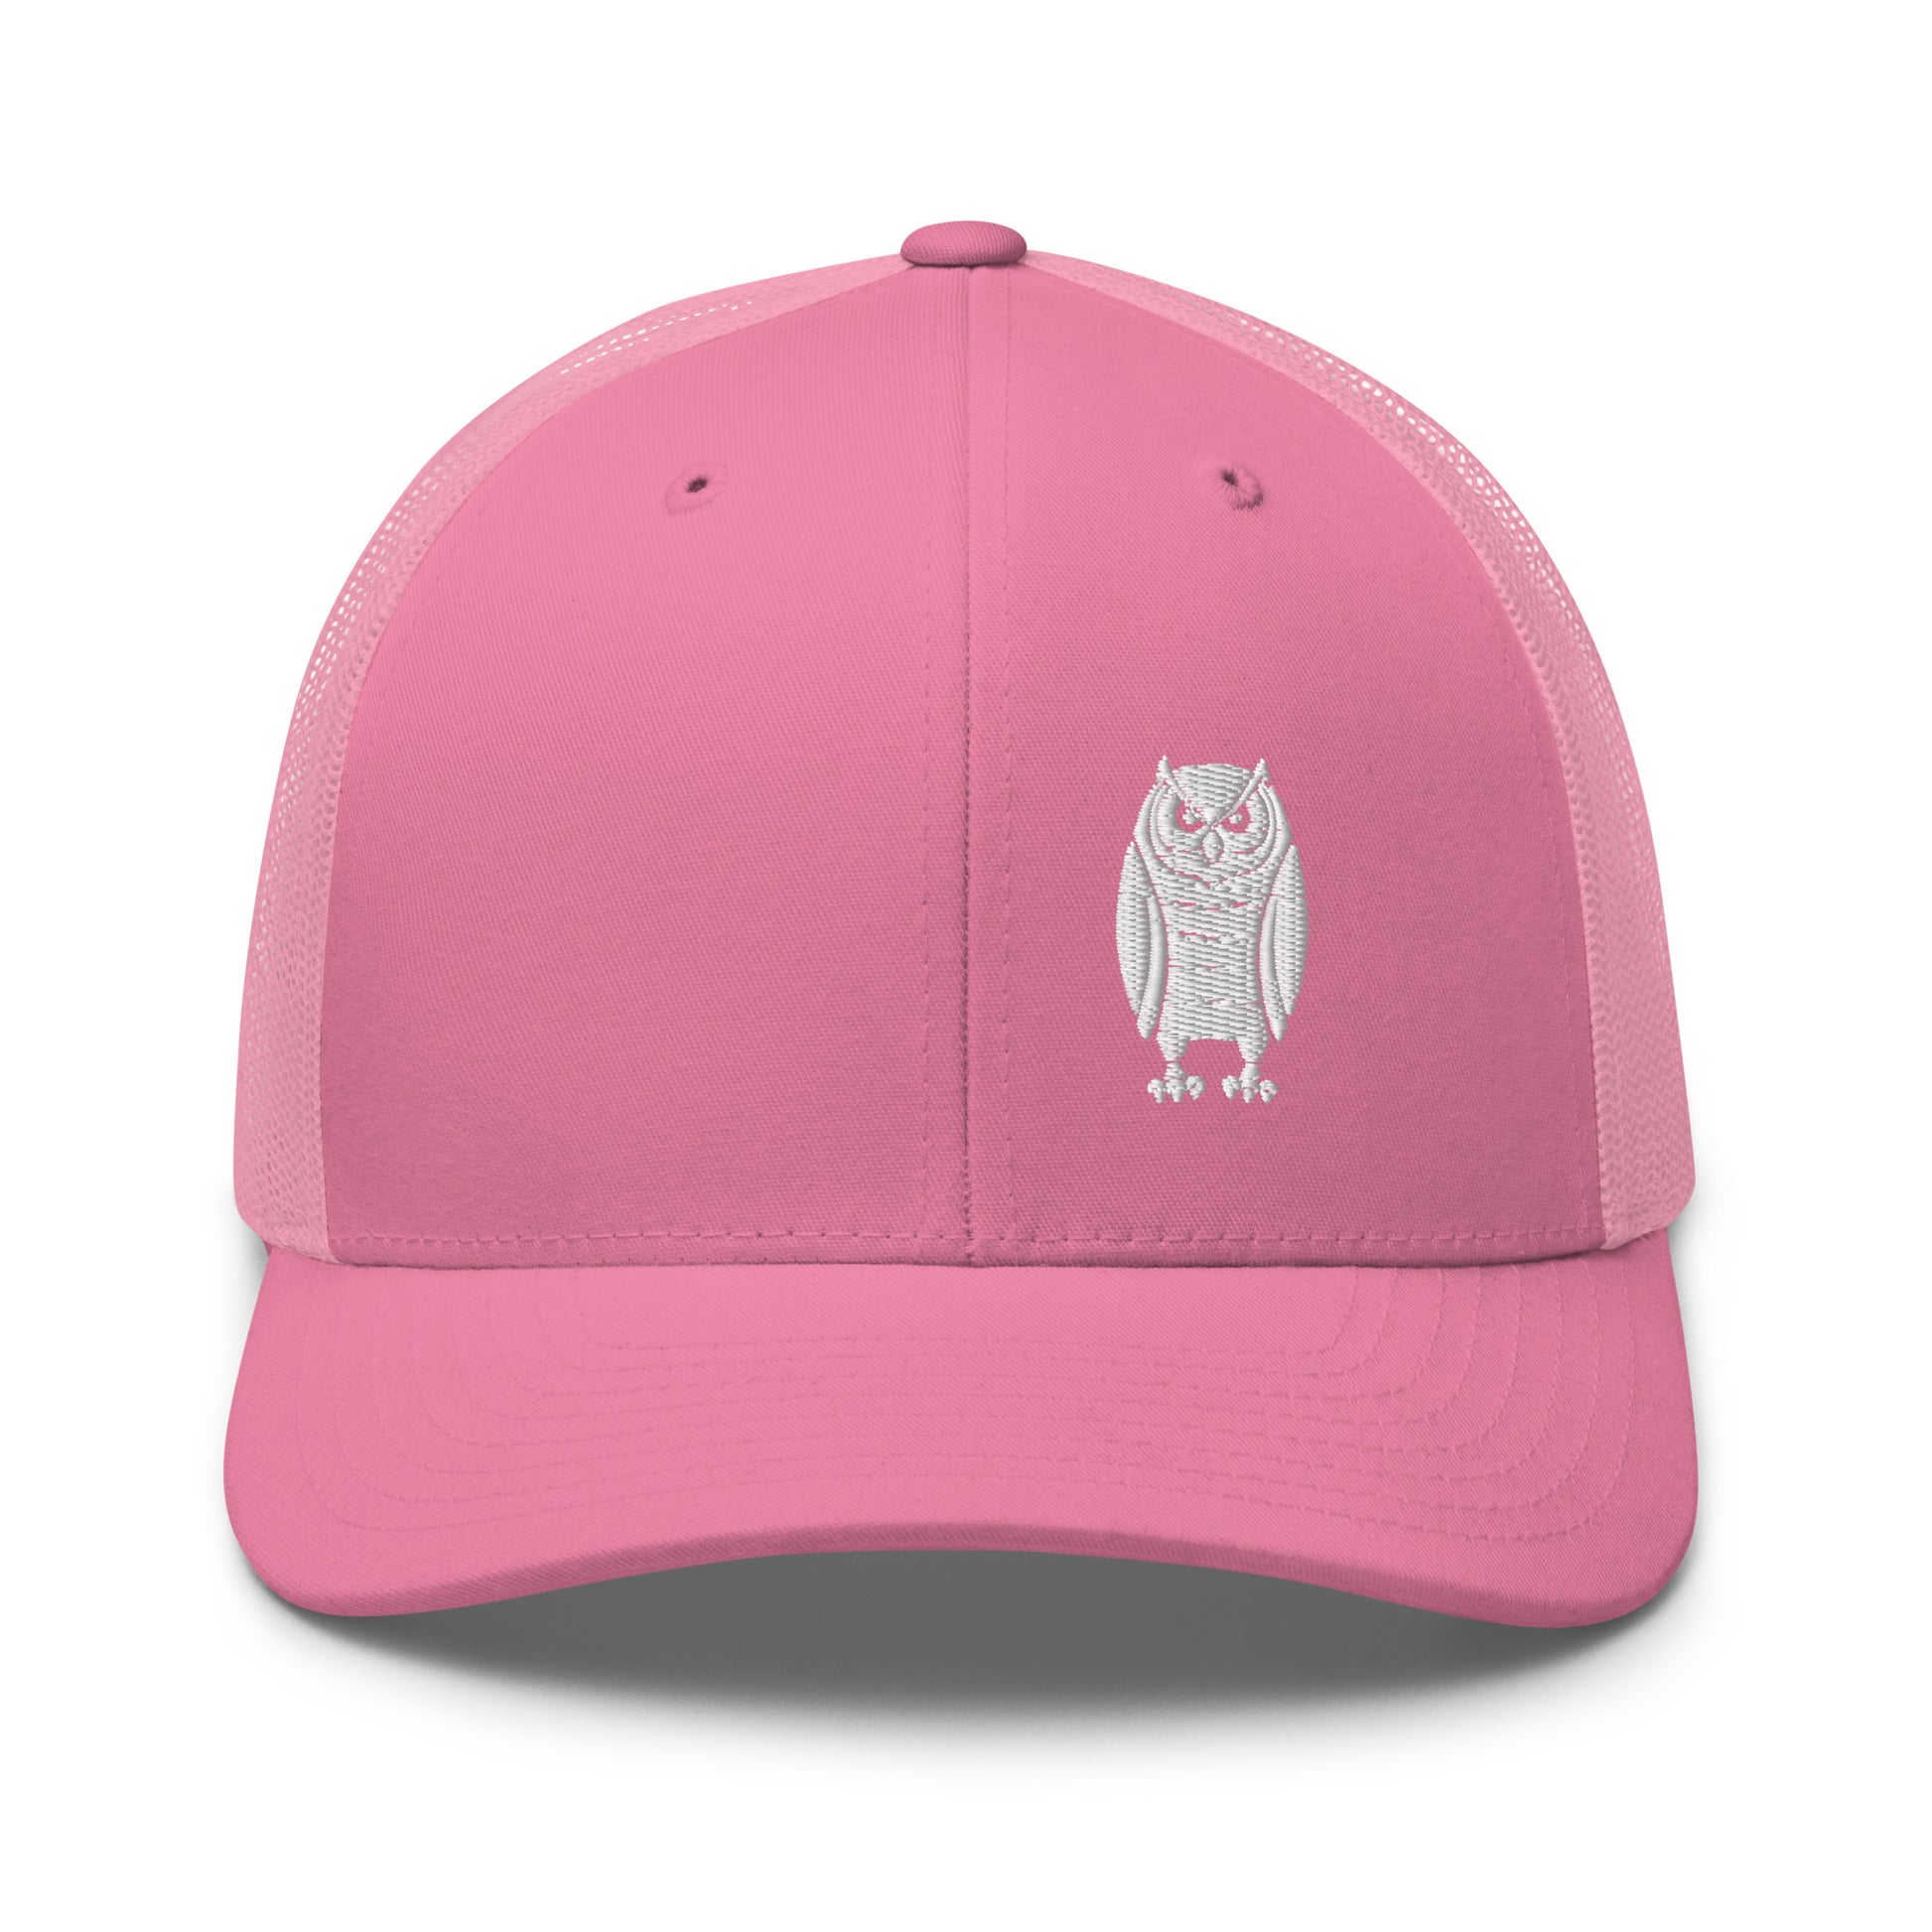 Owl Trucker Hat.  A Yupoon 6606 pink hat with an Owl embroidered on it.